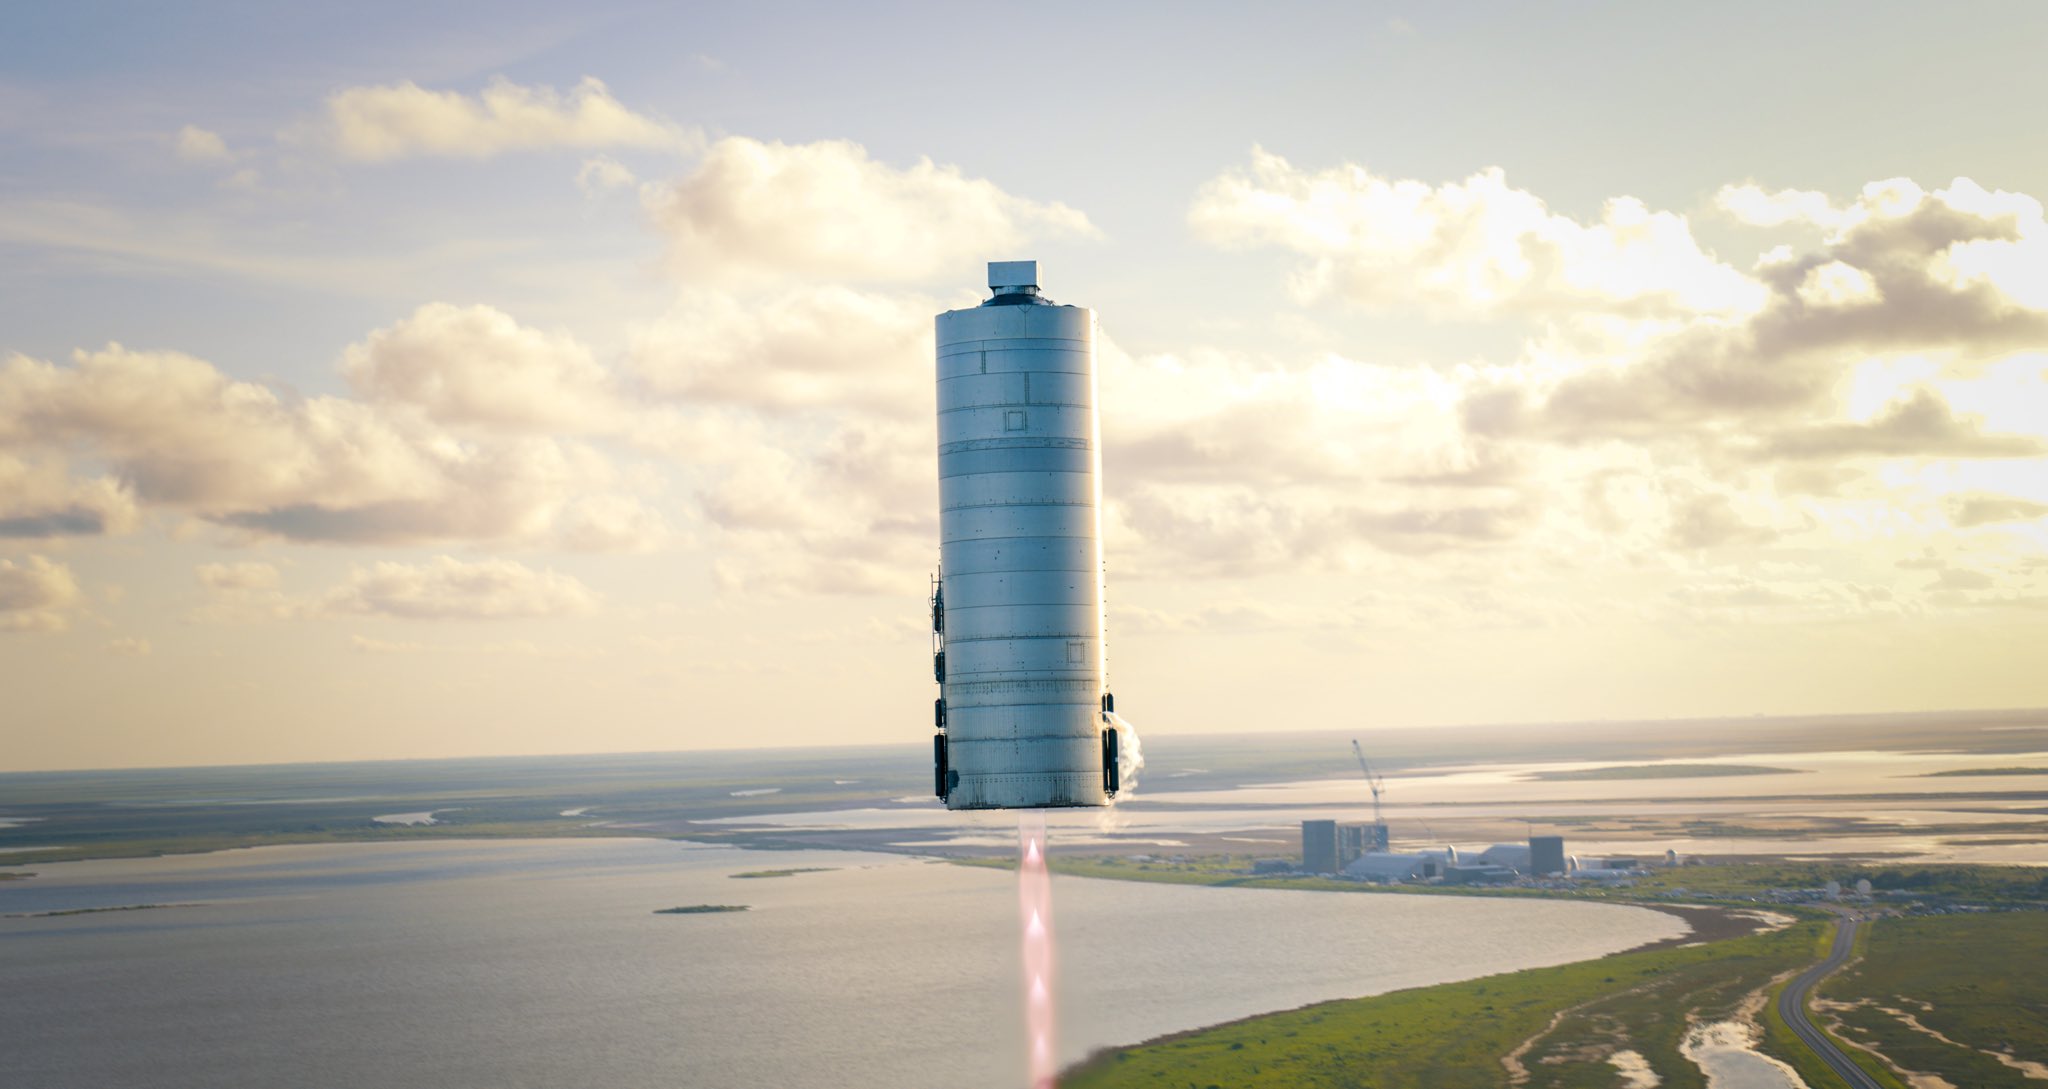 In photos: SpaceX's SN5 Starship prototype soars on 1st test flight | Space